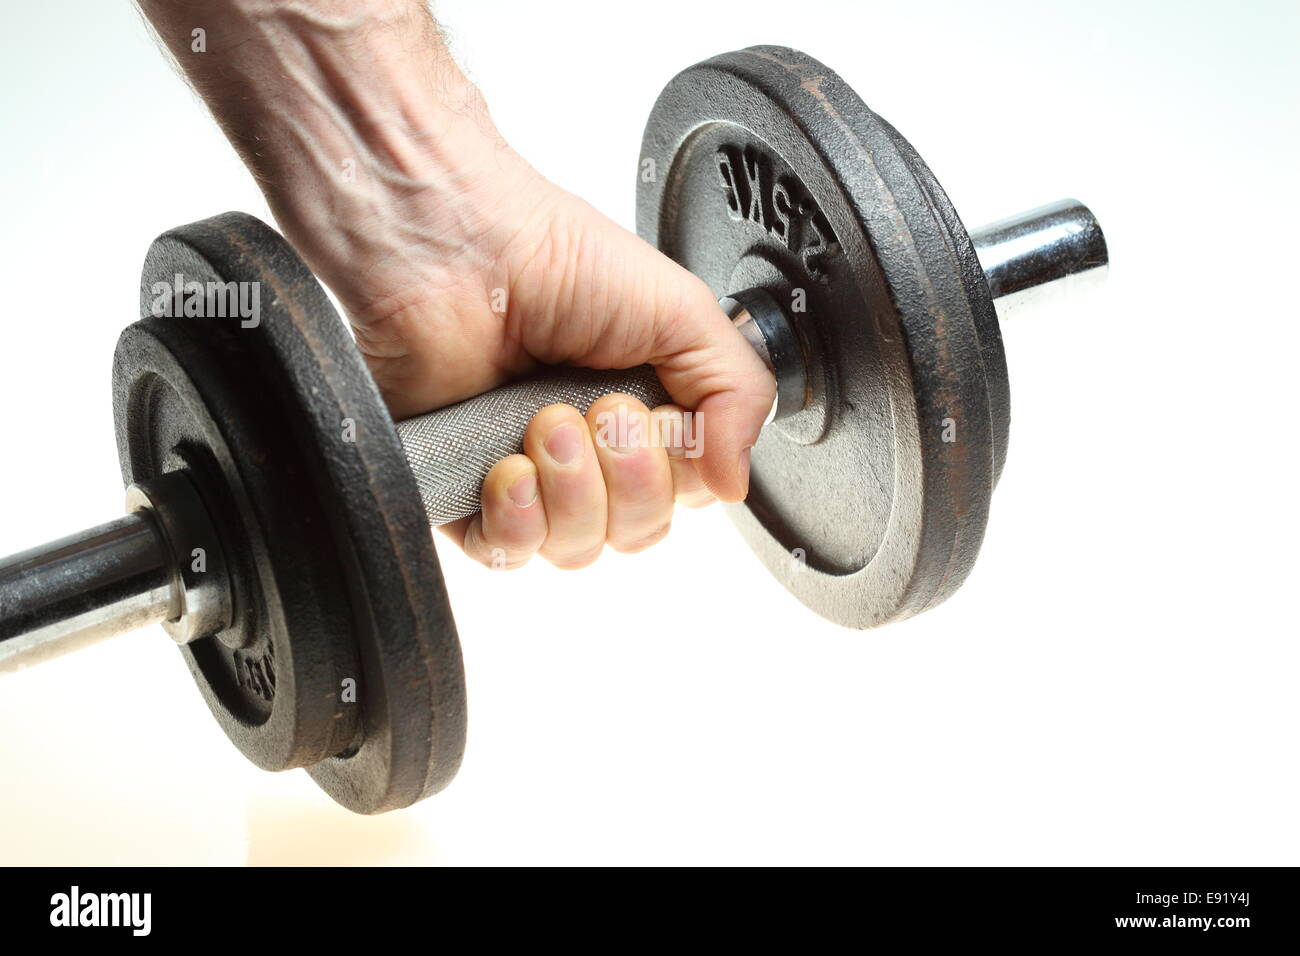 dumbbell and hand Stock Photo